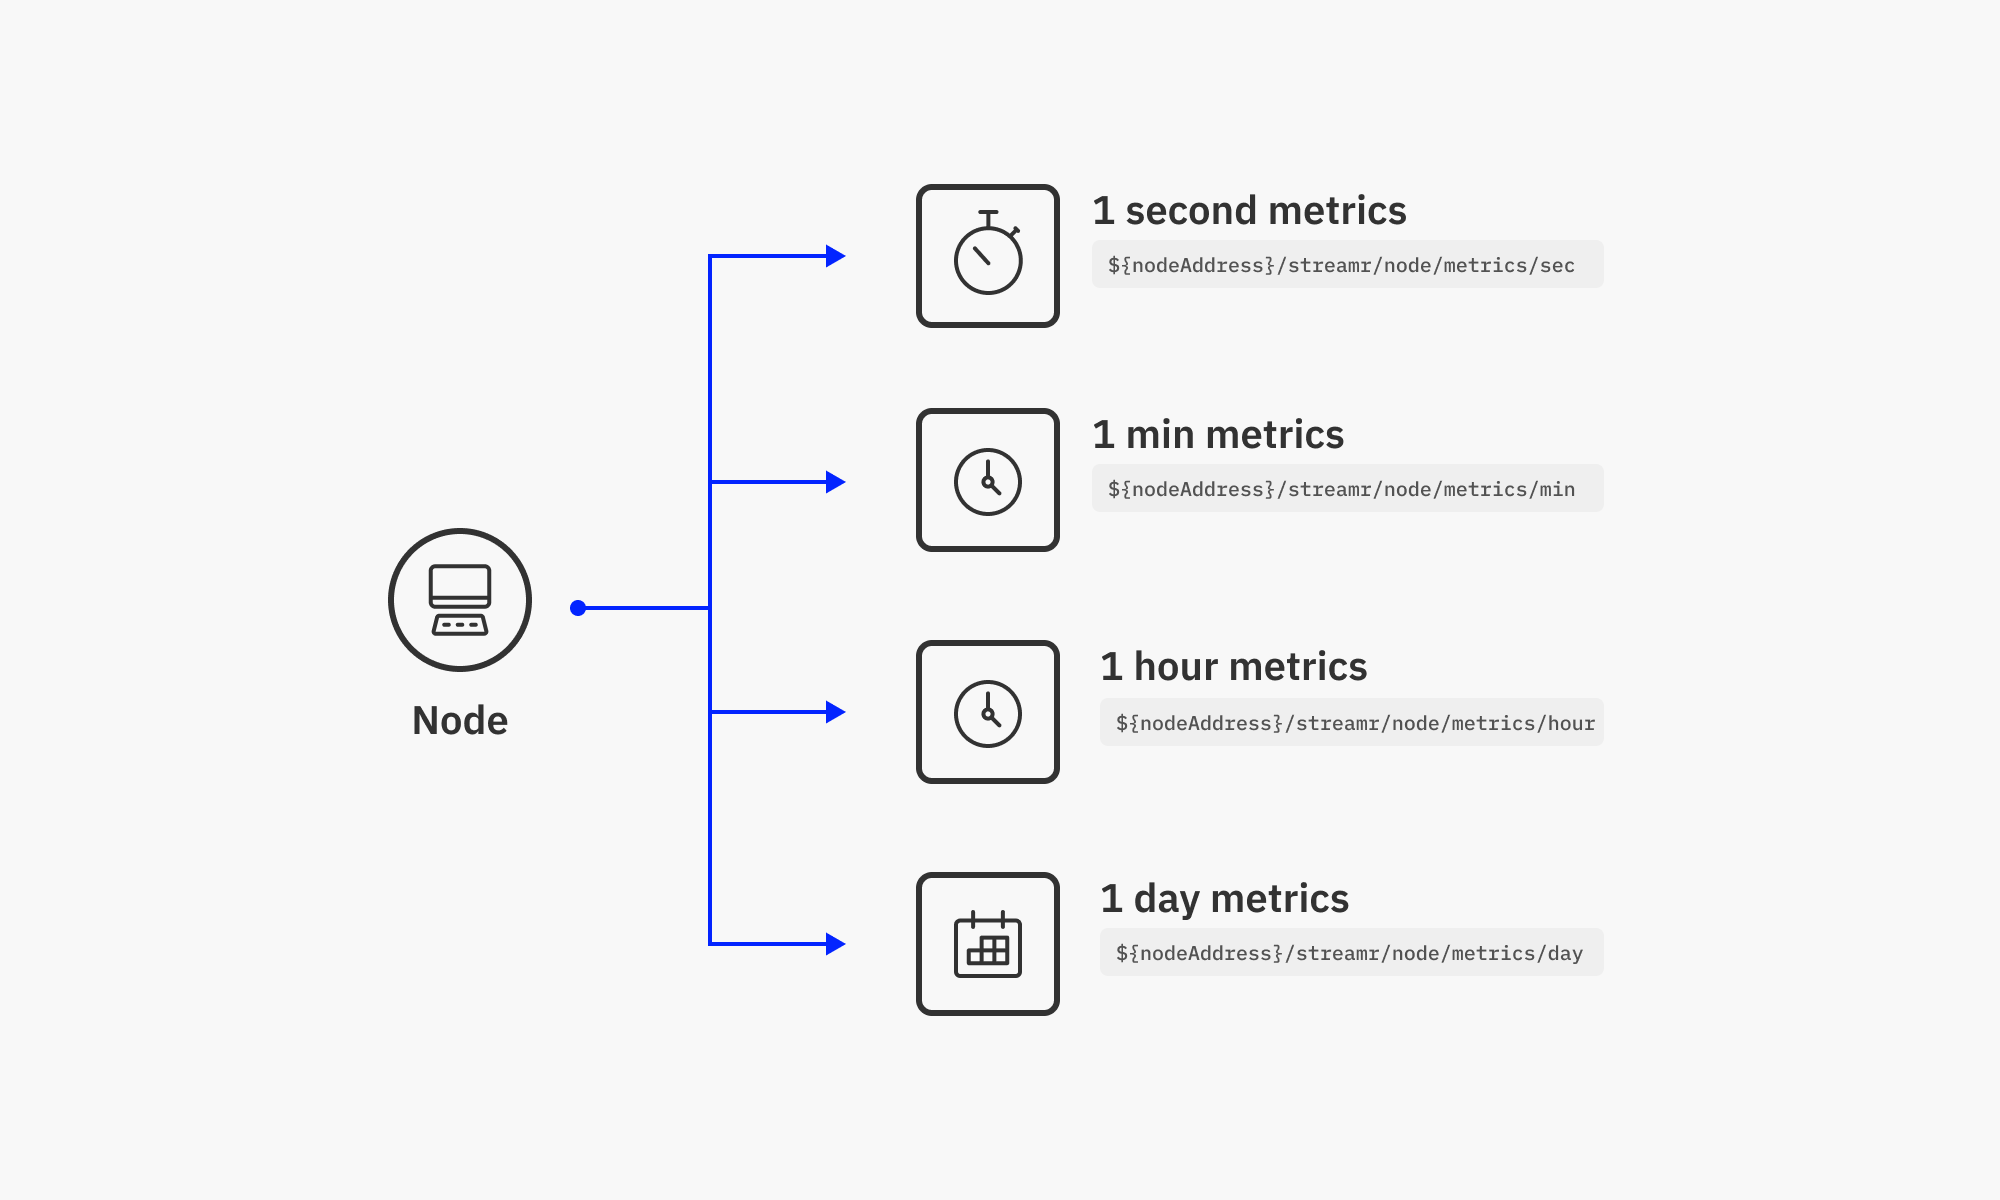 Collecting metrics data from decentralized systems